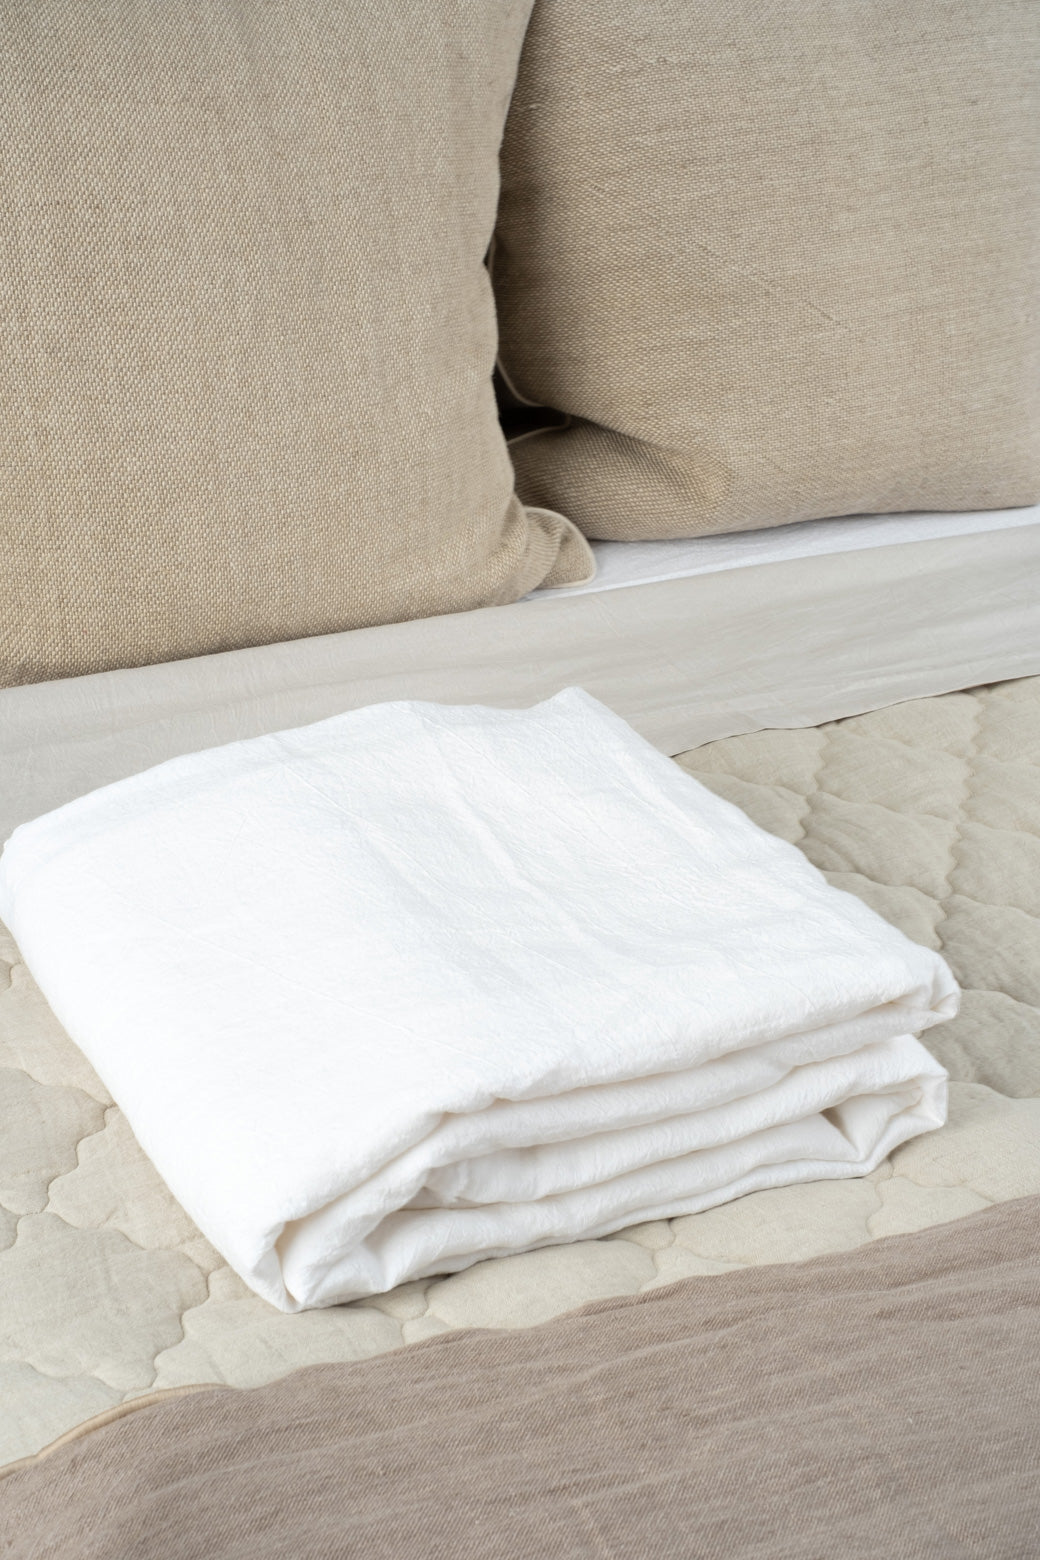 Hale Mercantile King Basix Fitted Sheet